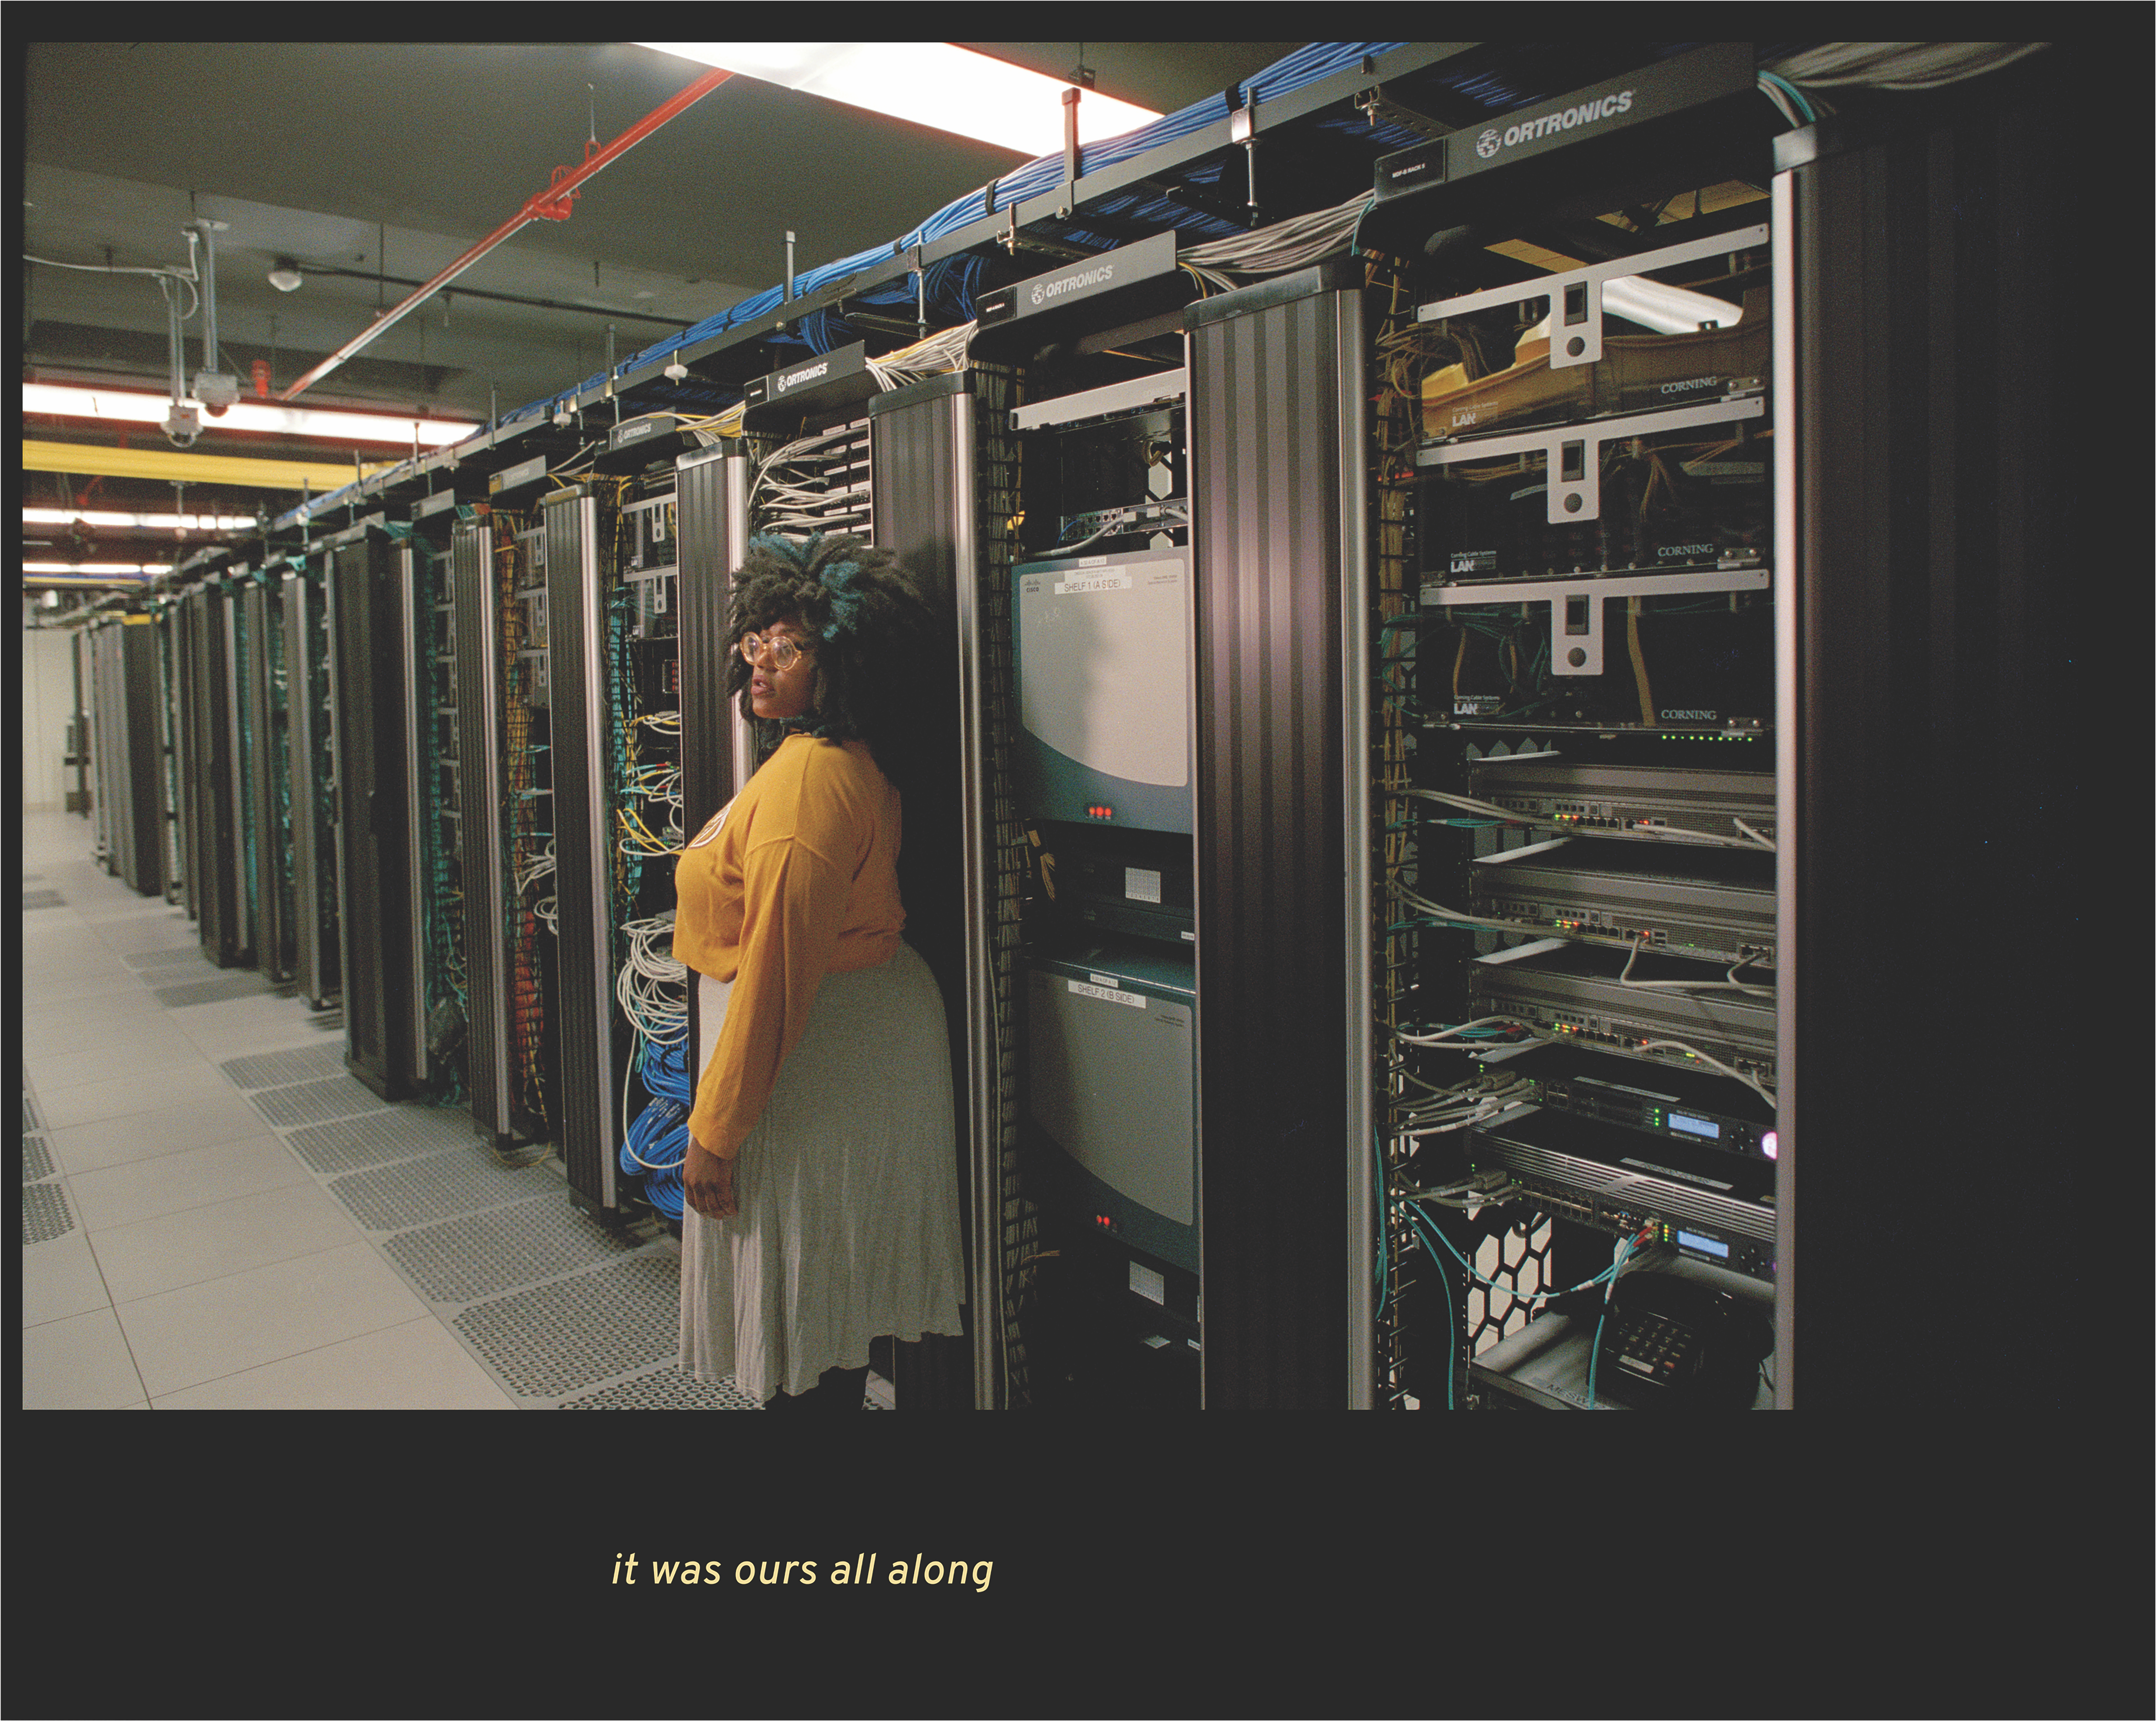 Black woman with black and blue hair stands in front of a large row servers with the caption “it was ours all along”